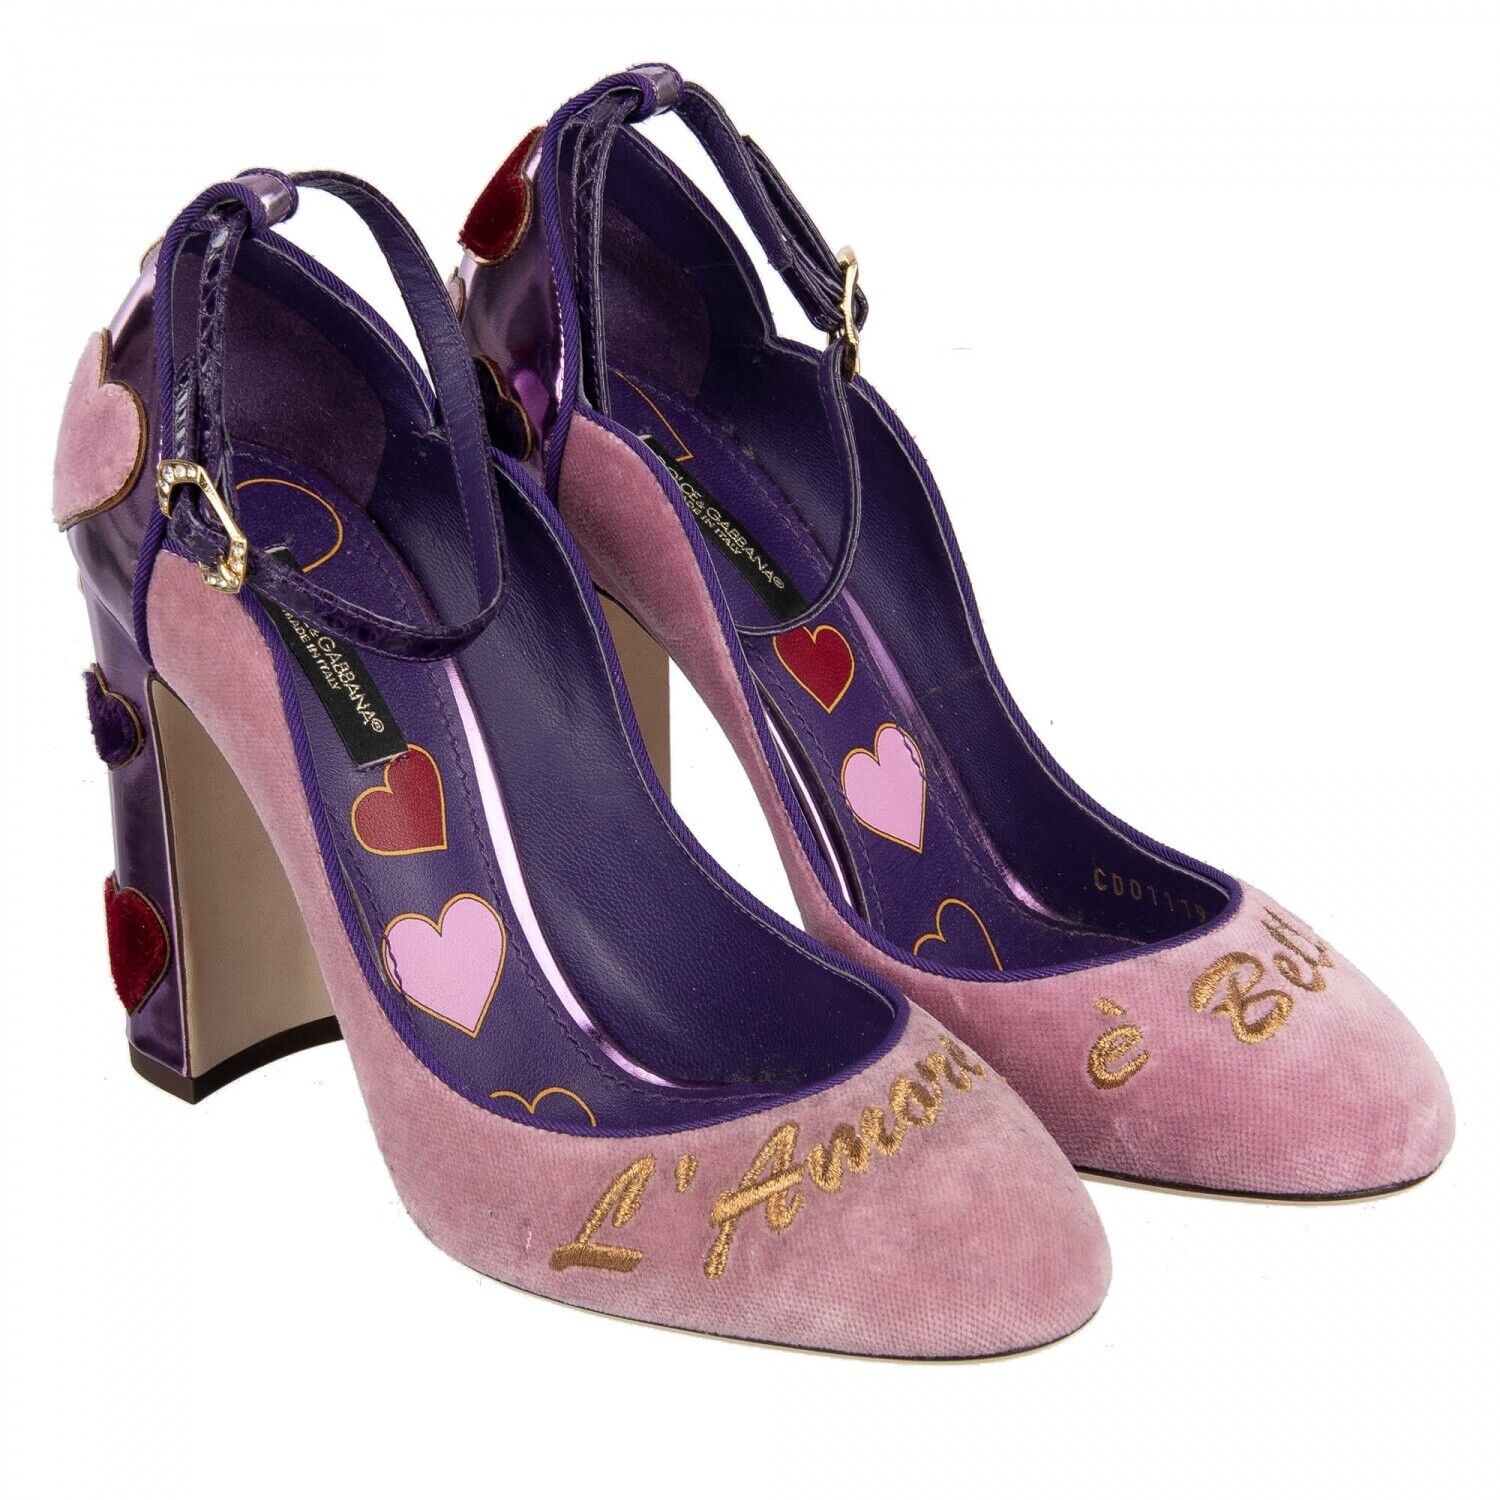 Pre-owned Dolce & Gabbana Velvet Ankle Strap Hearts Pumps Vally L'amore Purple Pink 09032